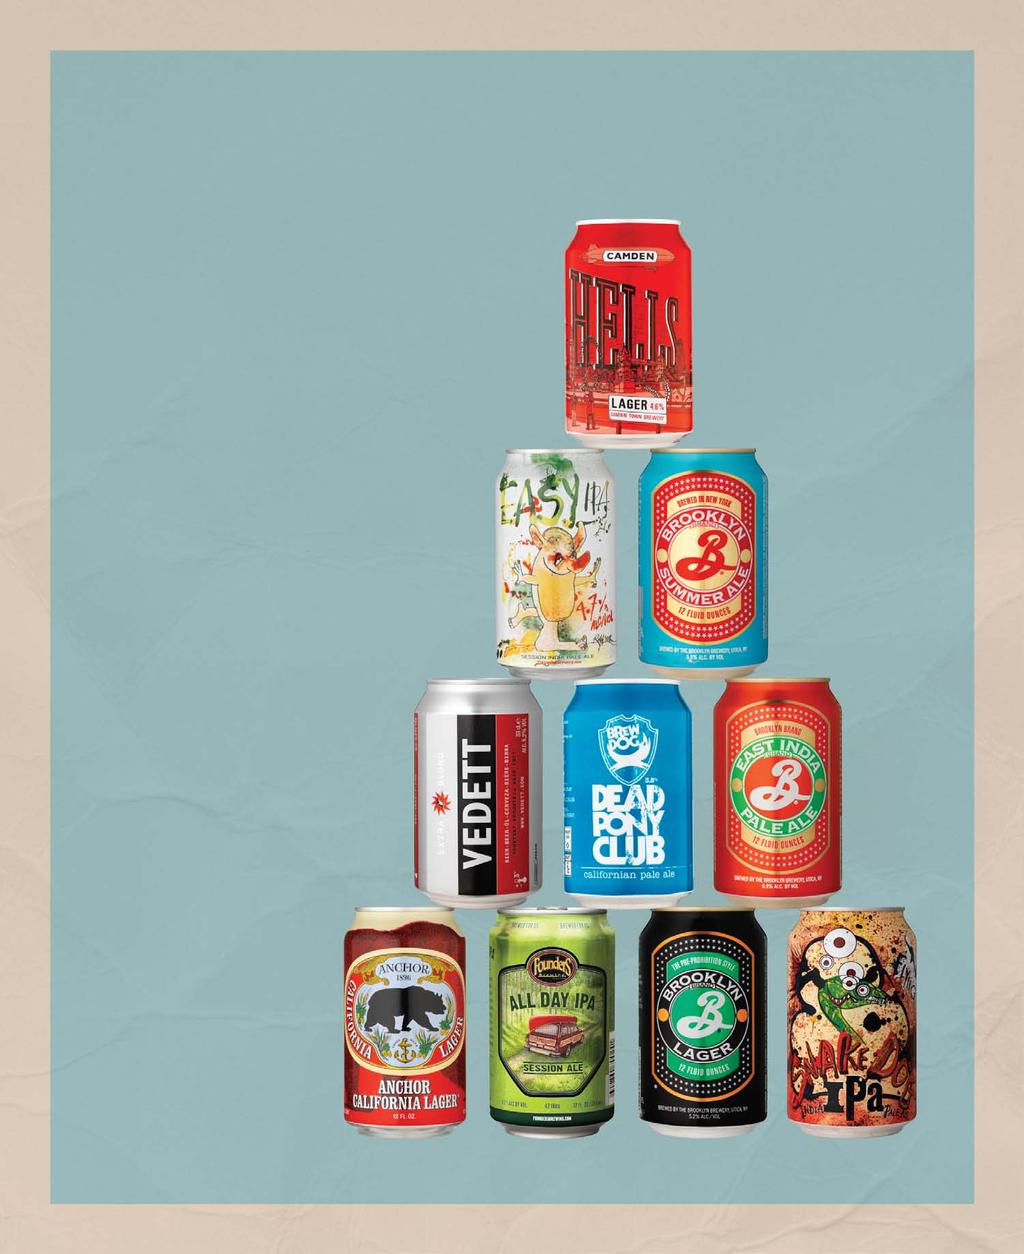 WE NOW SELL CRAFT BEER IN CANS Whichever way you look at it, the benefits of selling beer in cans really stack up!